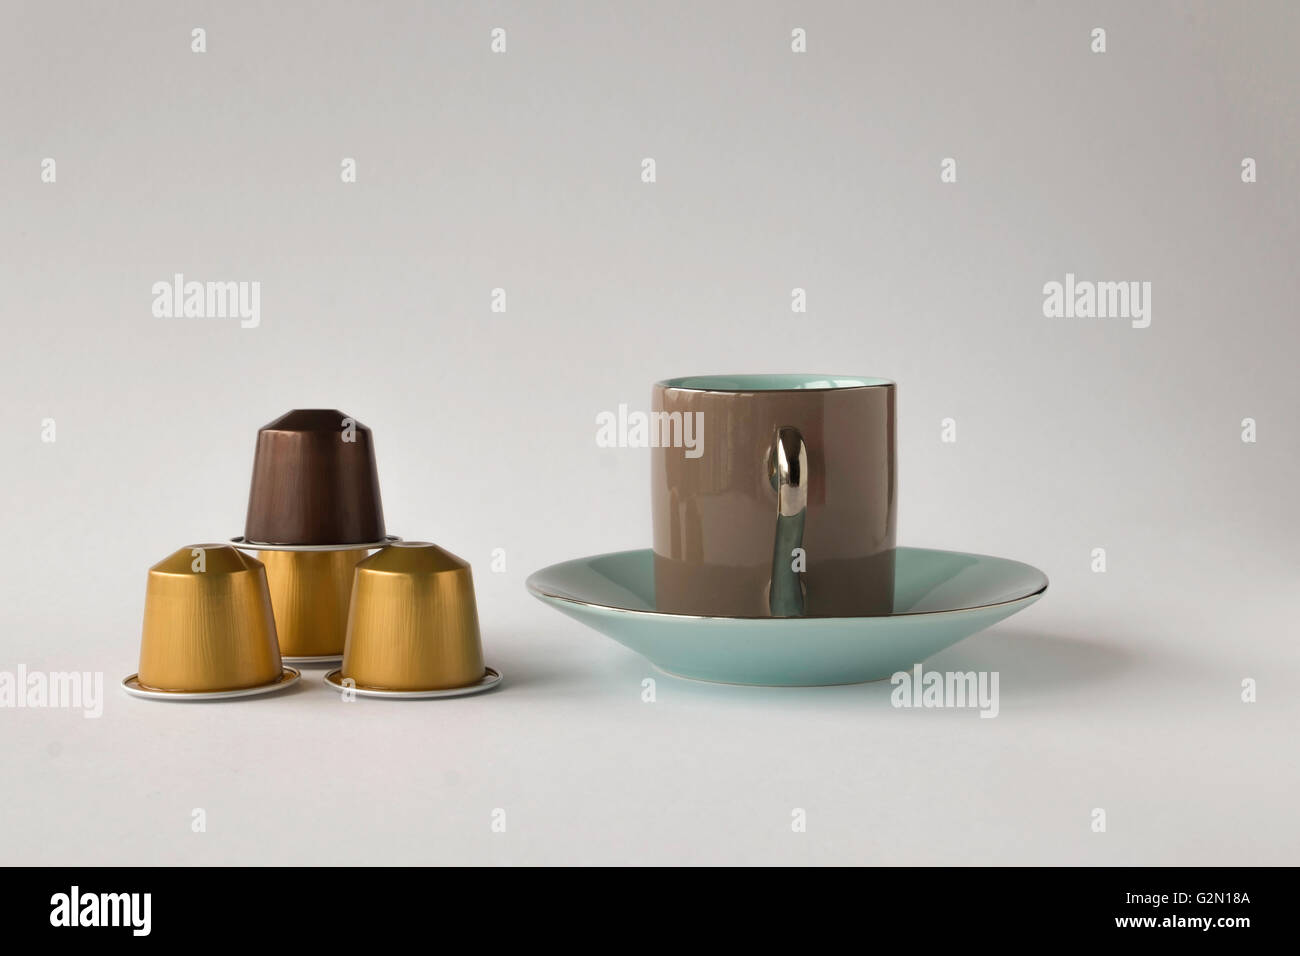 Espresso cup and saucer with coffee pods on white background Stock Photo